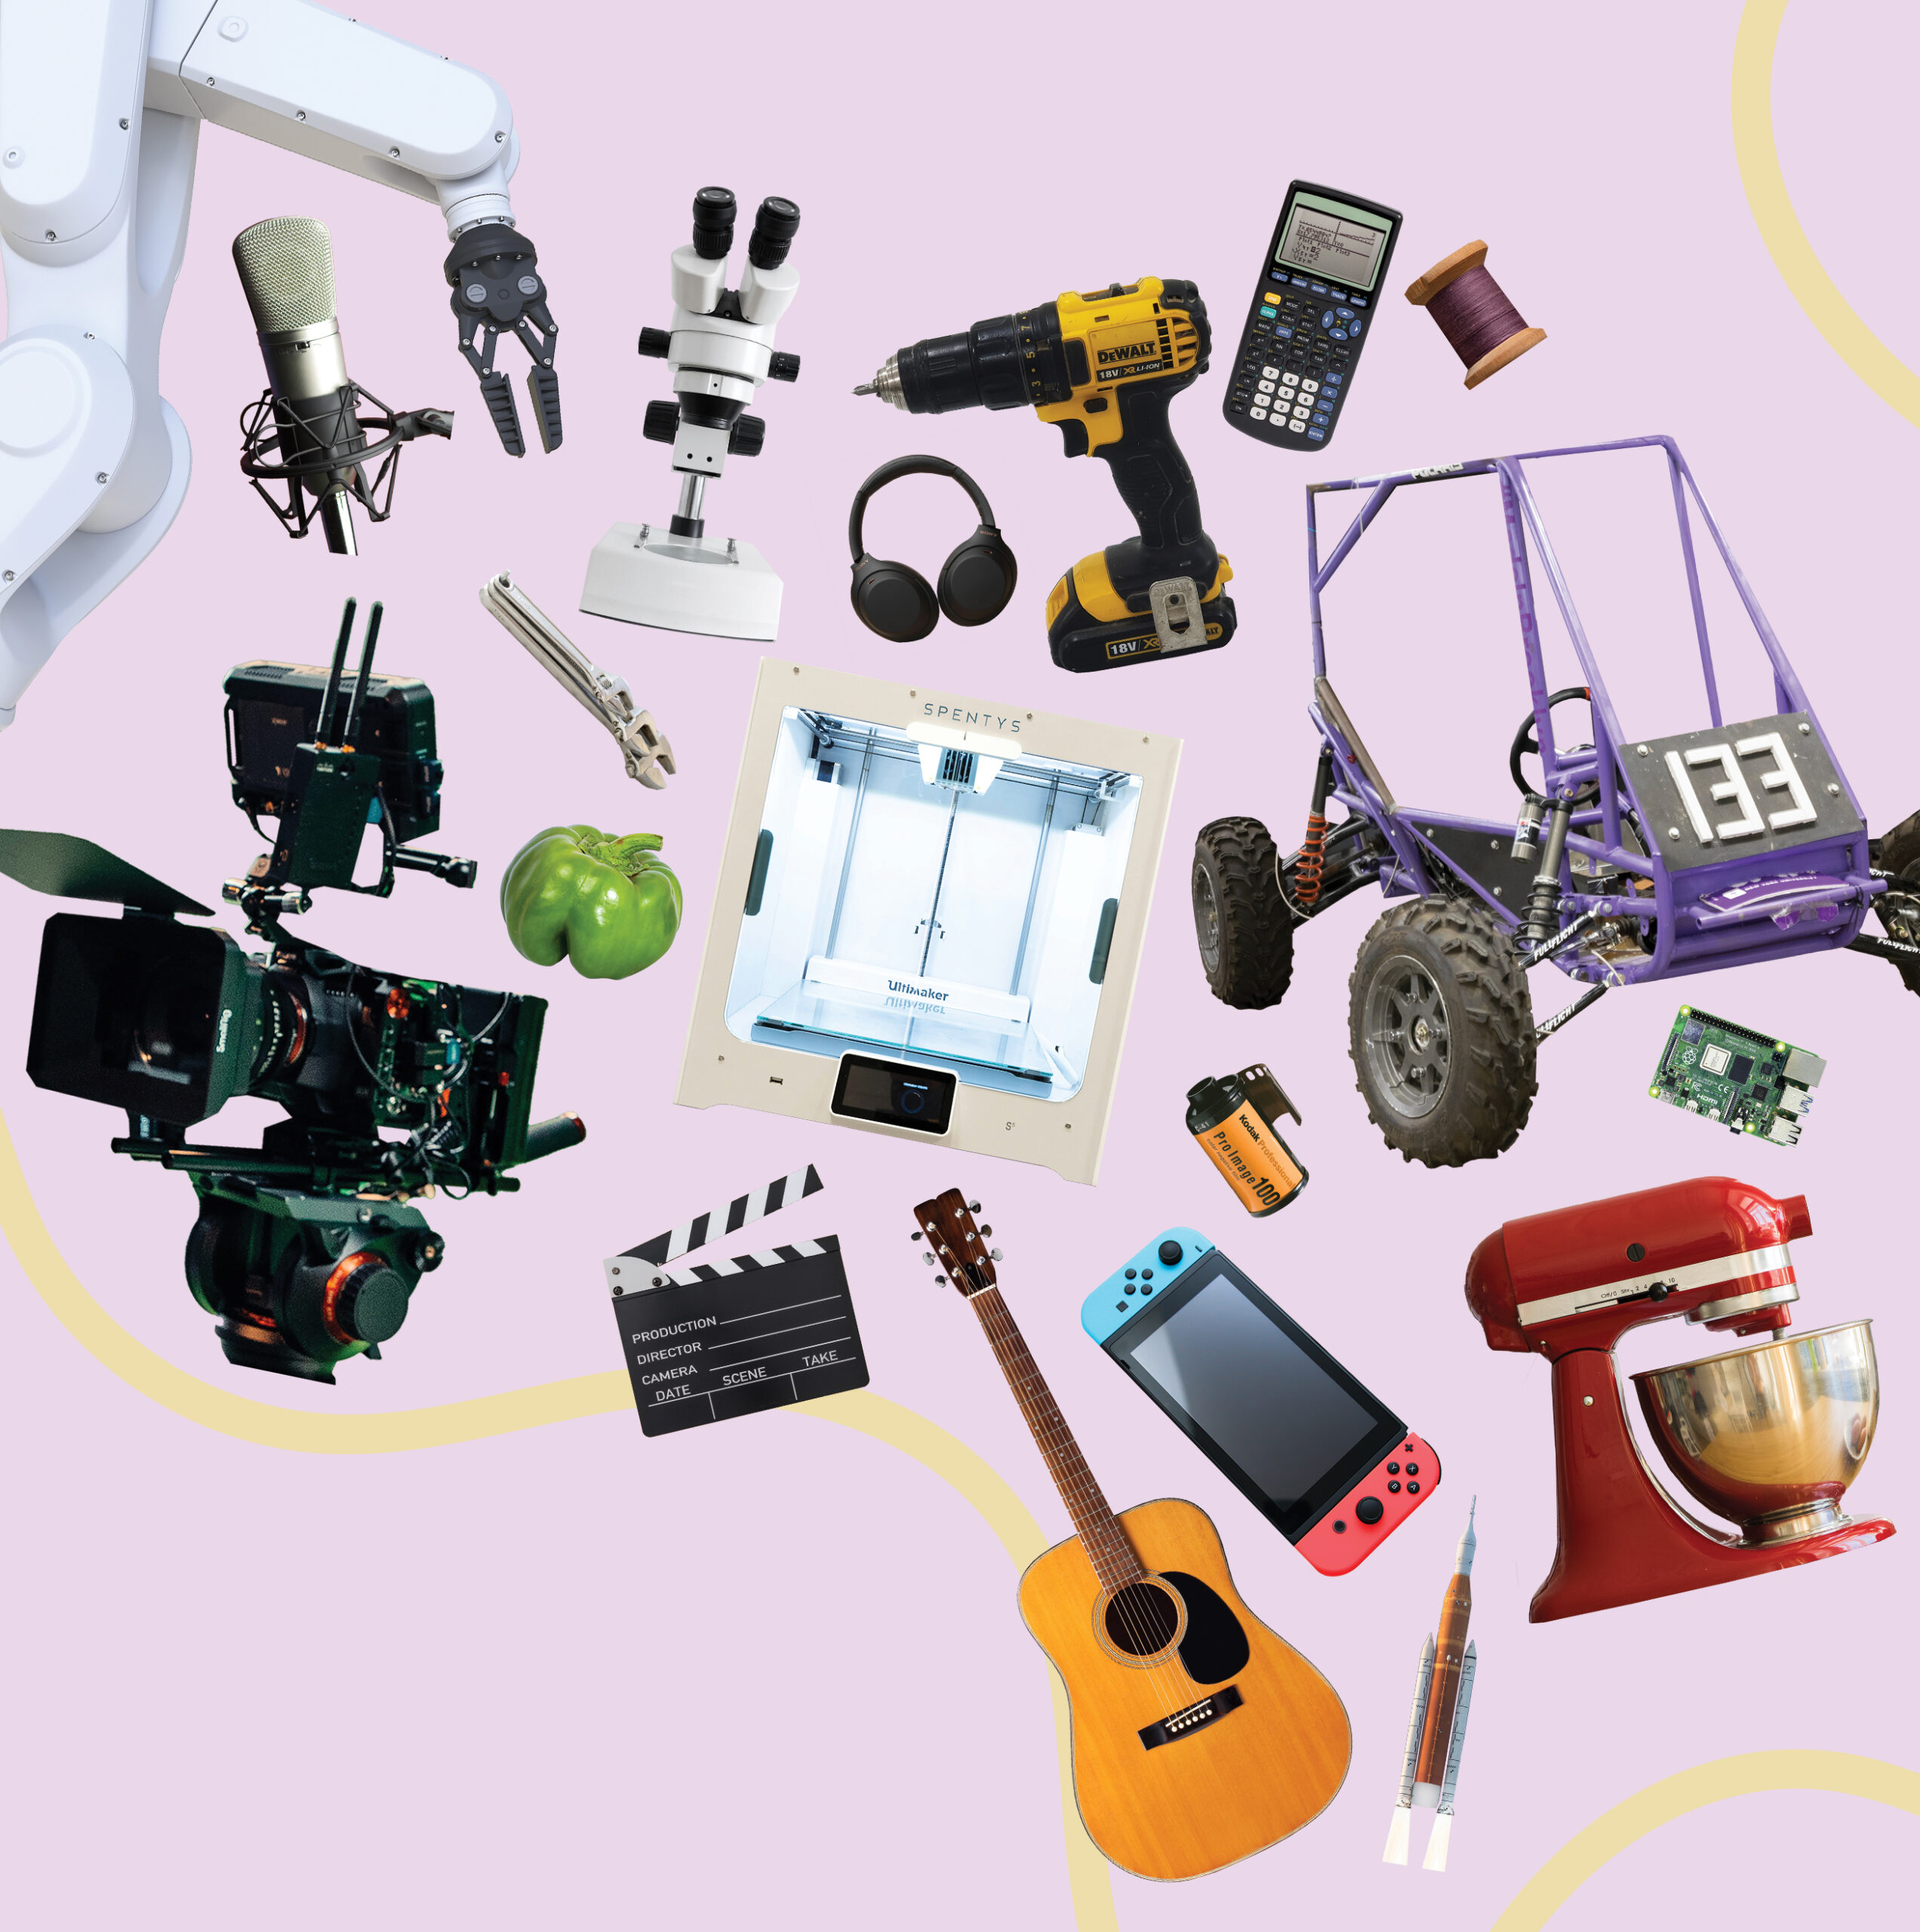 A collage featuring a robotic arm, microphone, microscope, headphones, drill, calculator, spool of thread, race car, microchip, stand mixer, small rocket, acoustic guitar, Nintendo Switch, roll of film, clapboard, 3D printer, pepper, wrench, and large professional film camera.